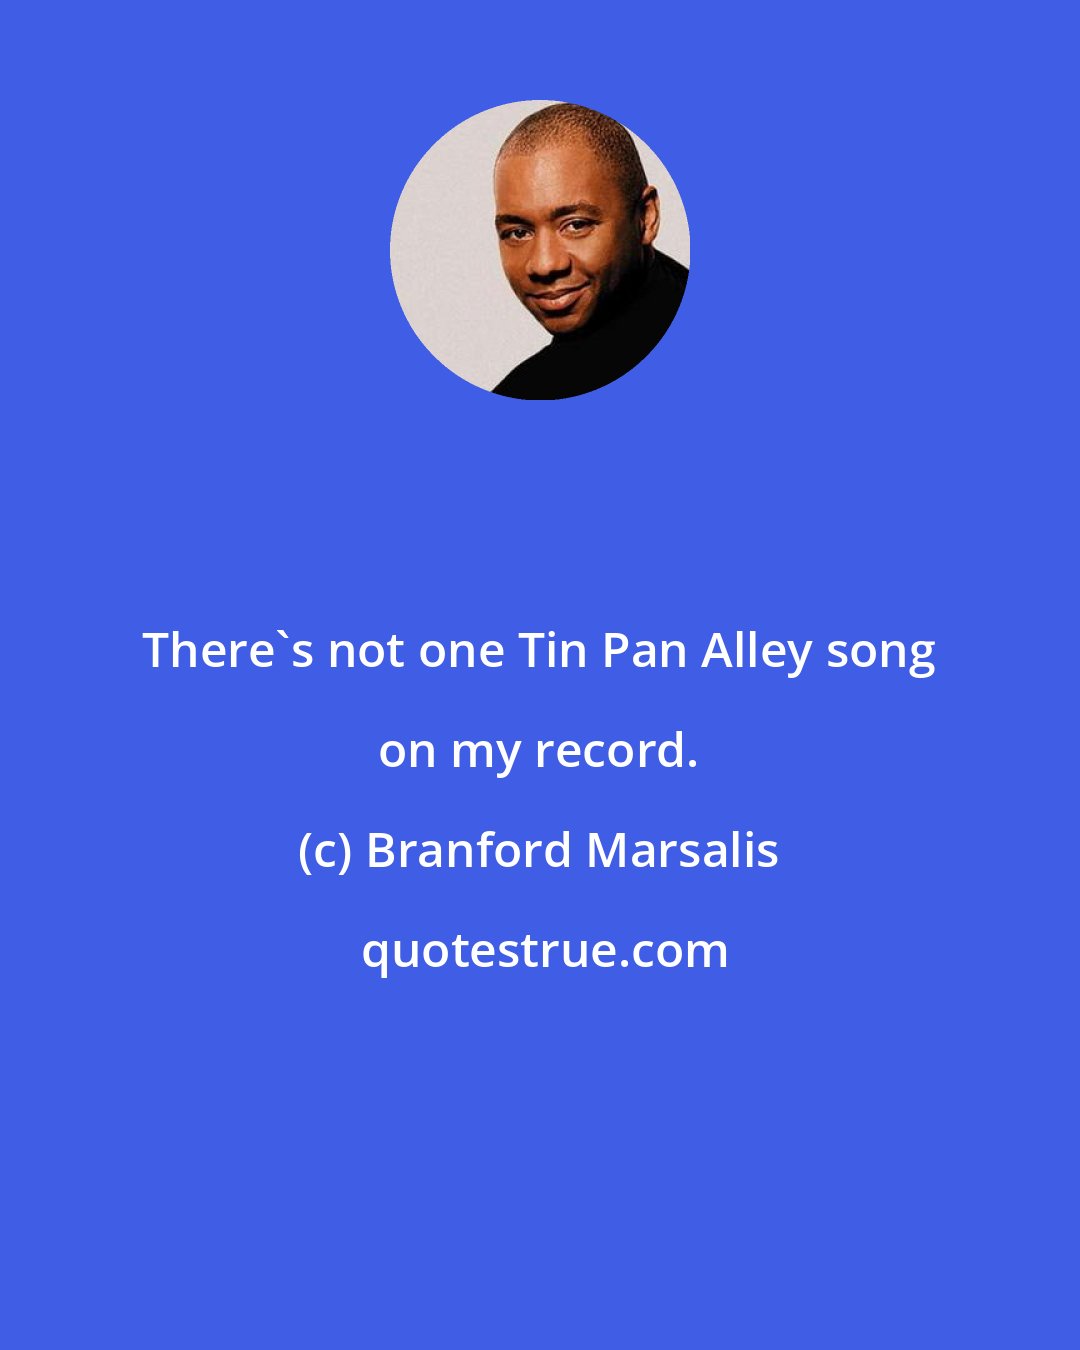 Branford Marsalis: There's not one Tin Pan Alley song on my record.